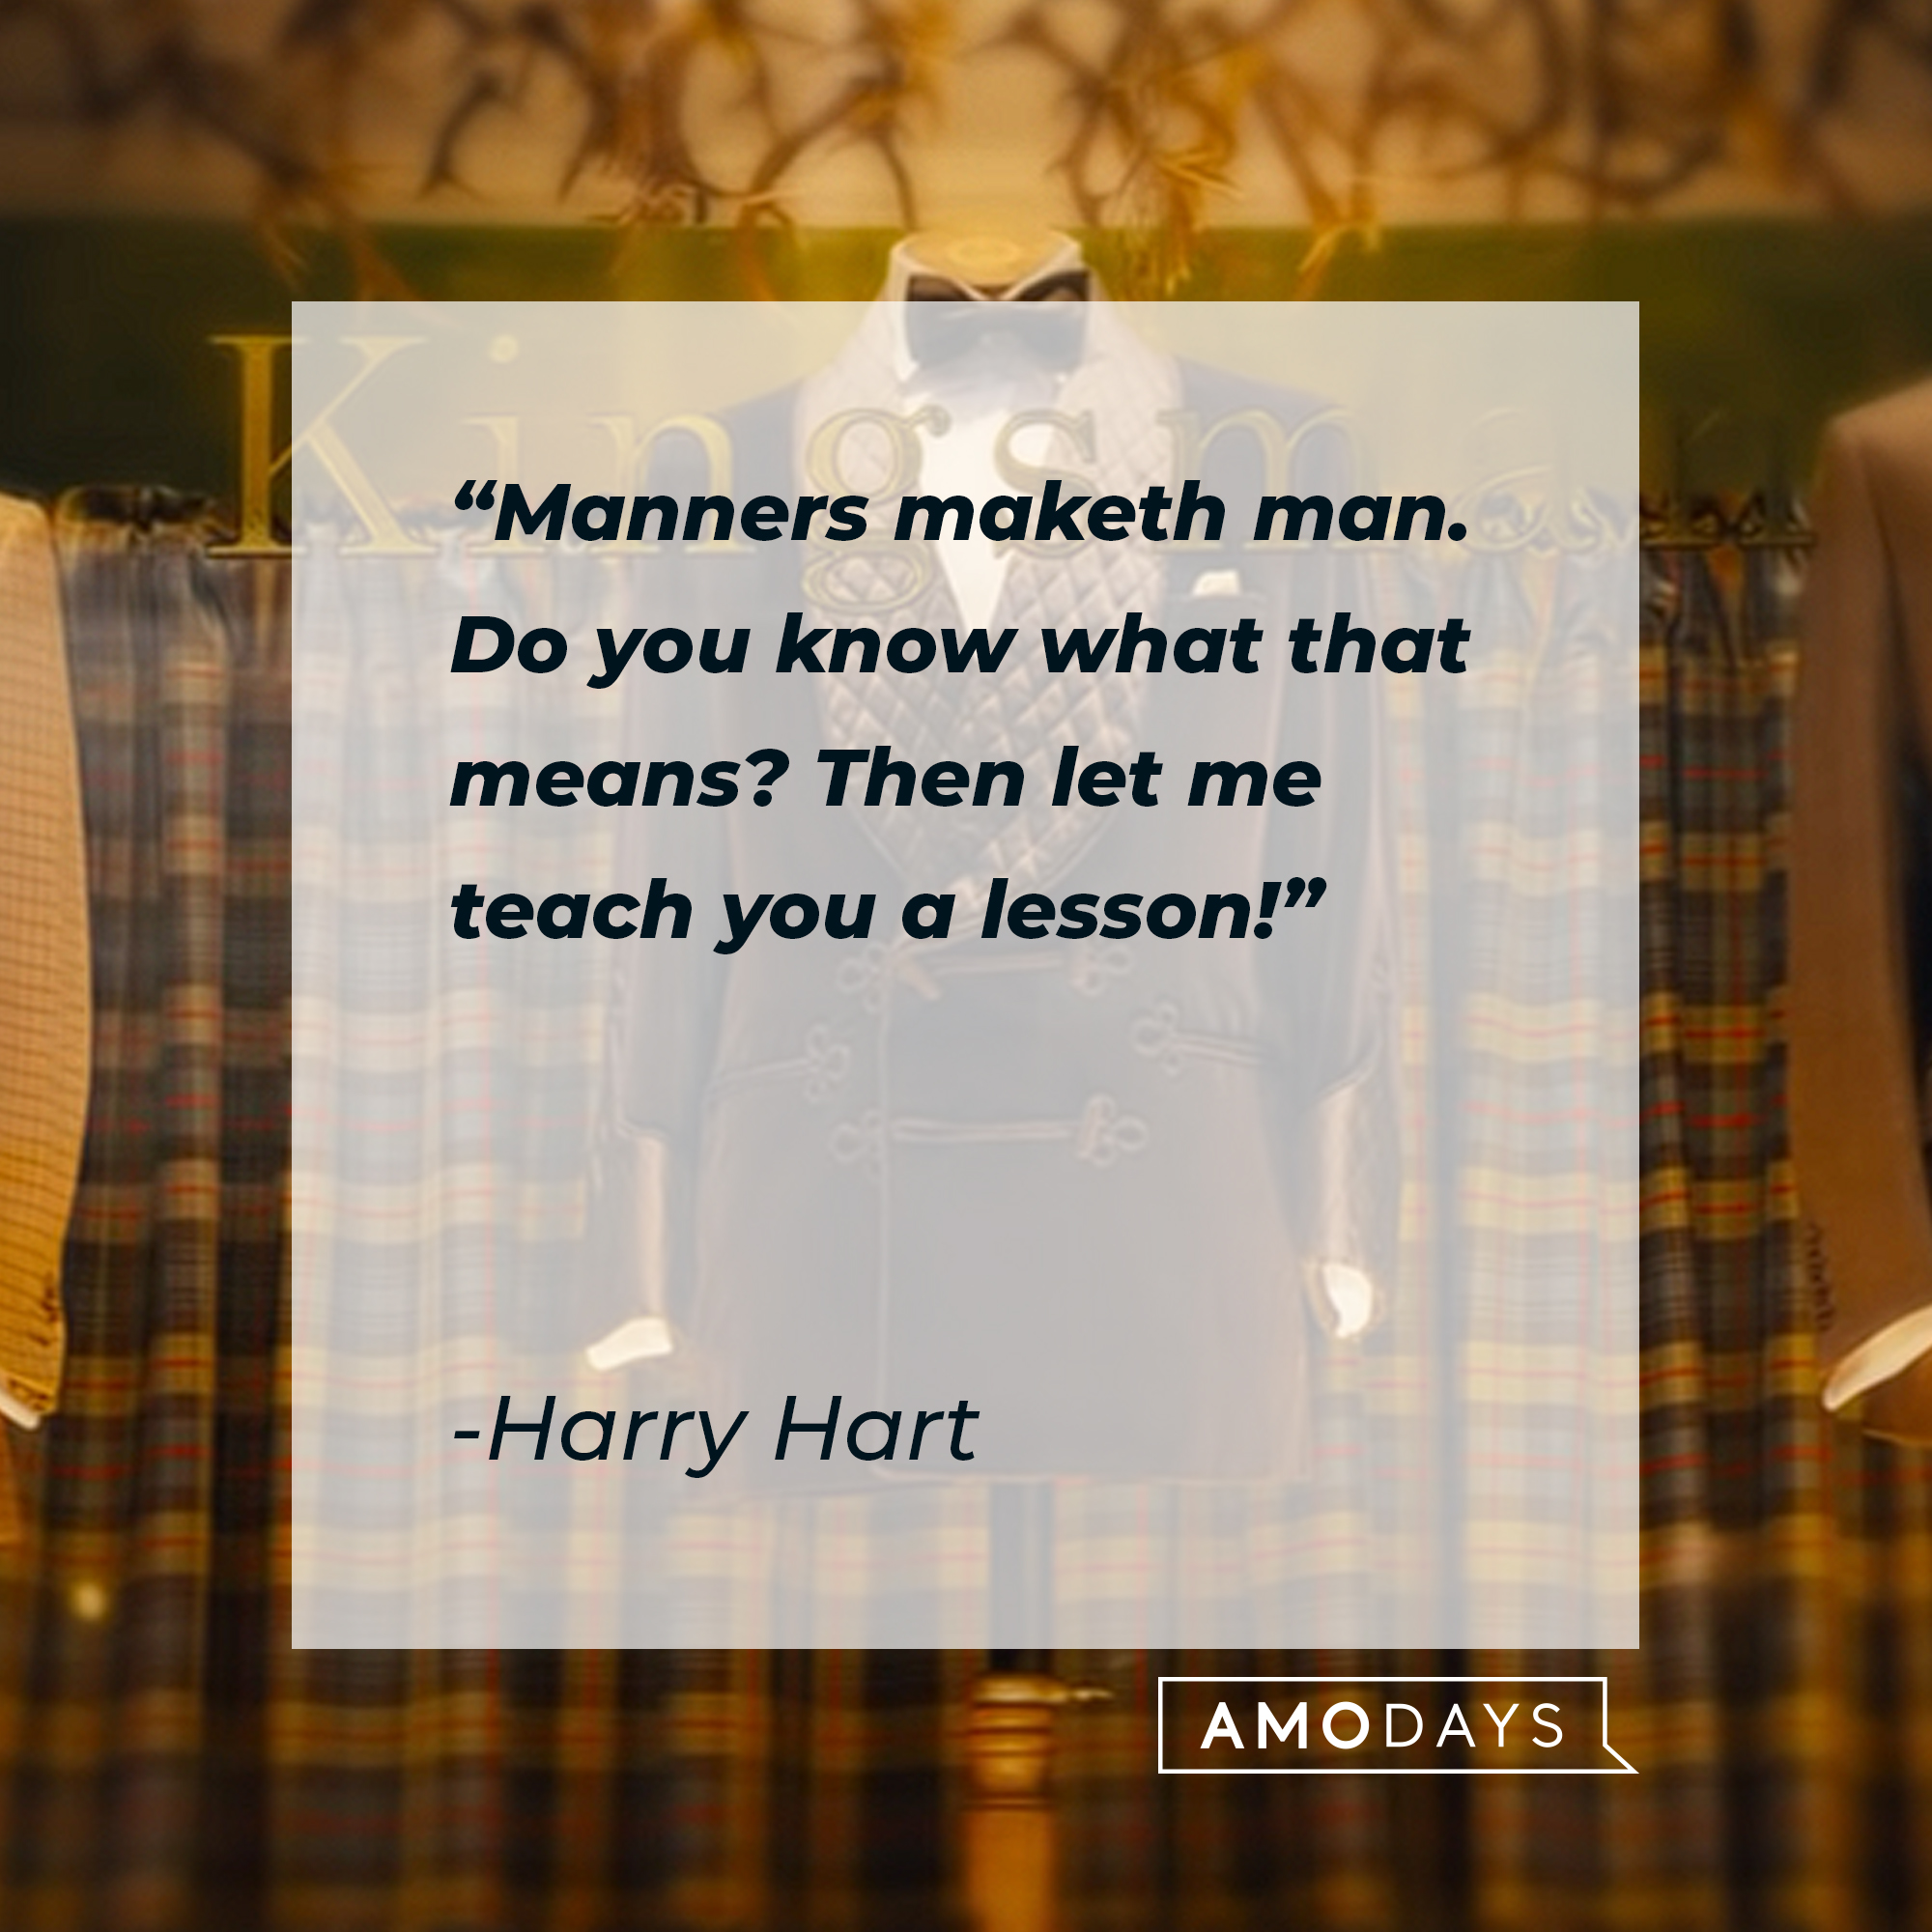 Harry Hart's quote: "Manners maketh man. Do you know what that means? Then let me teach you a lesson!" | Image: YouTube / 20thCenturyStudios